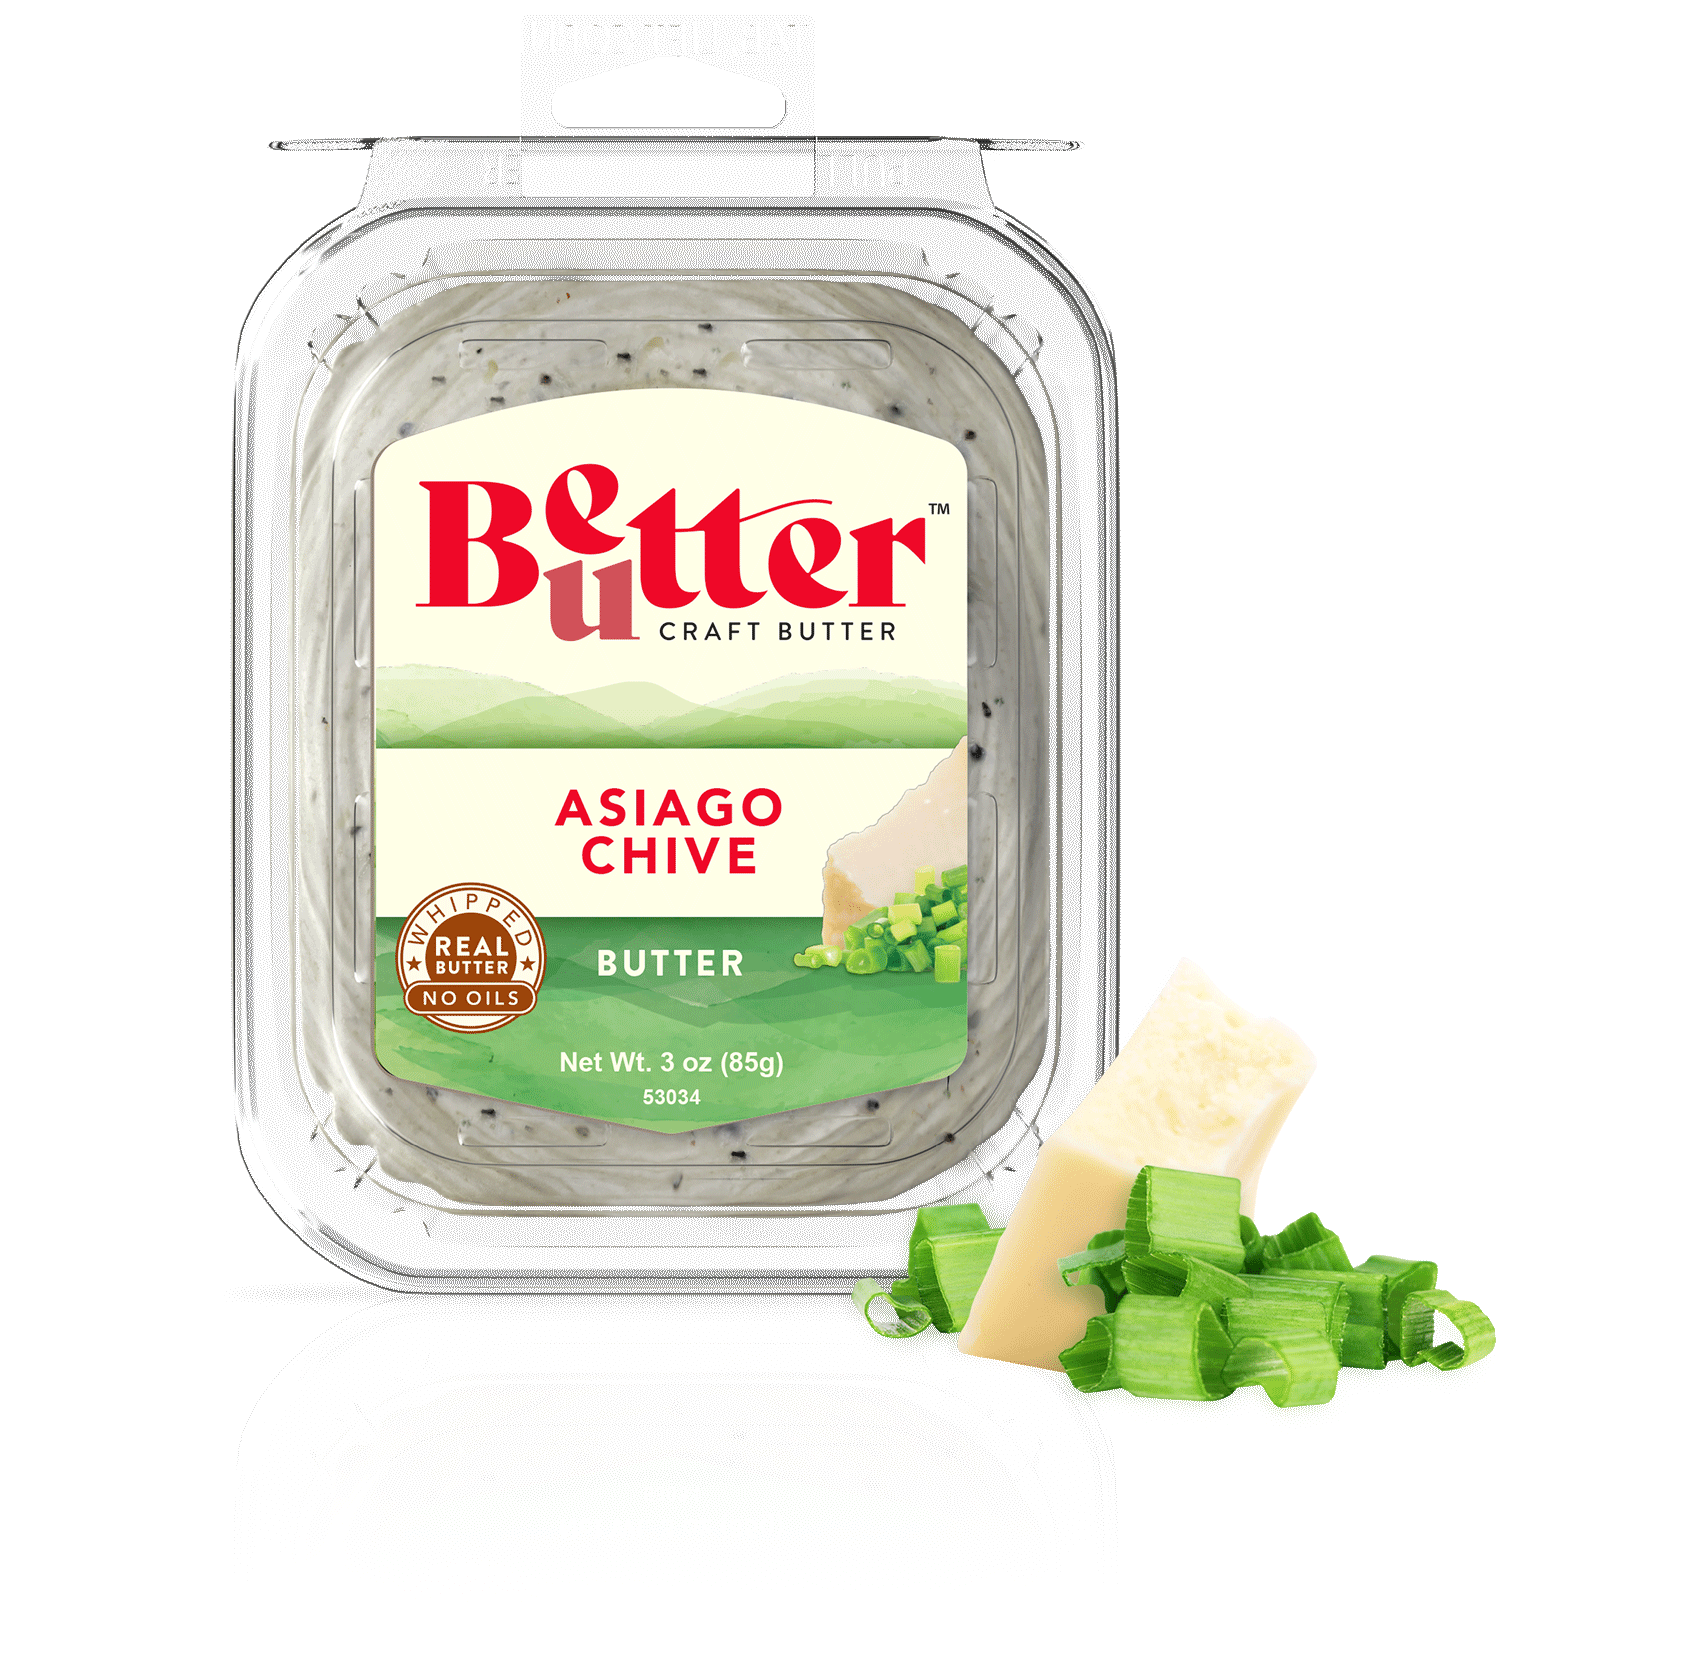 Asiago Chive Craft Butter